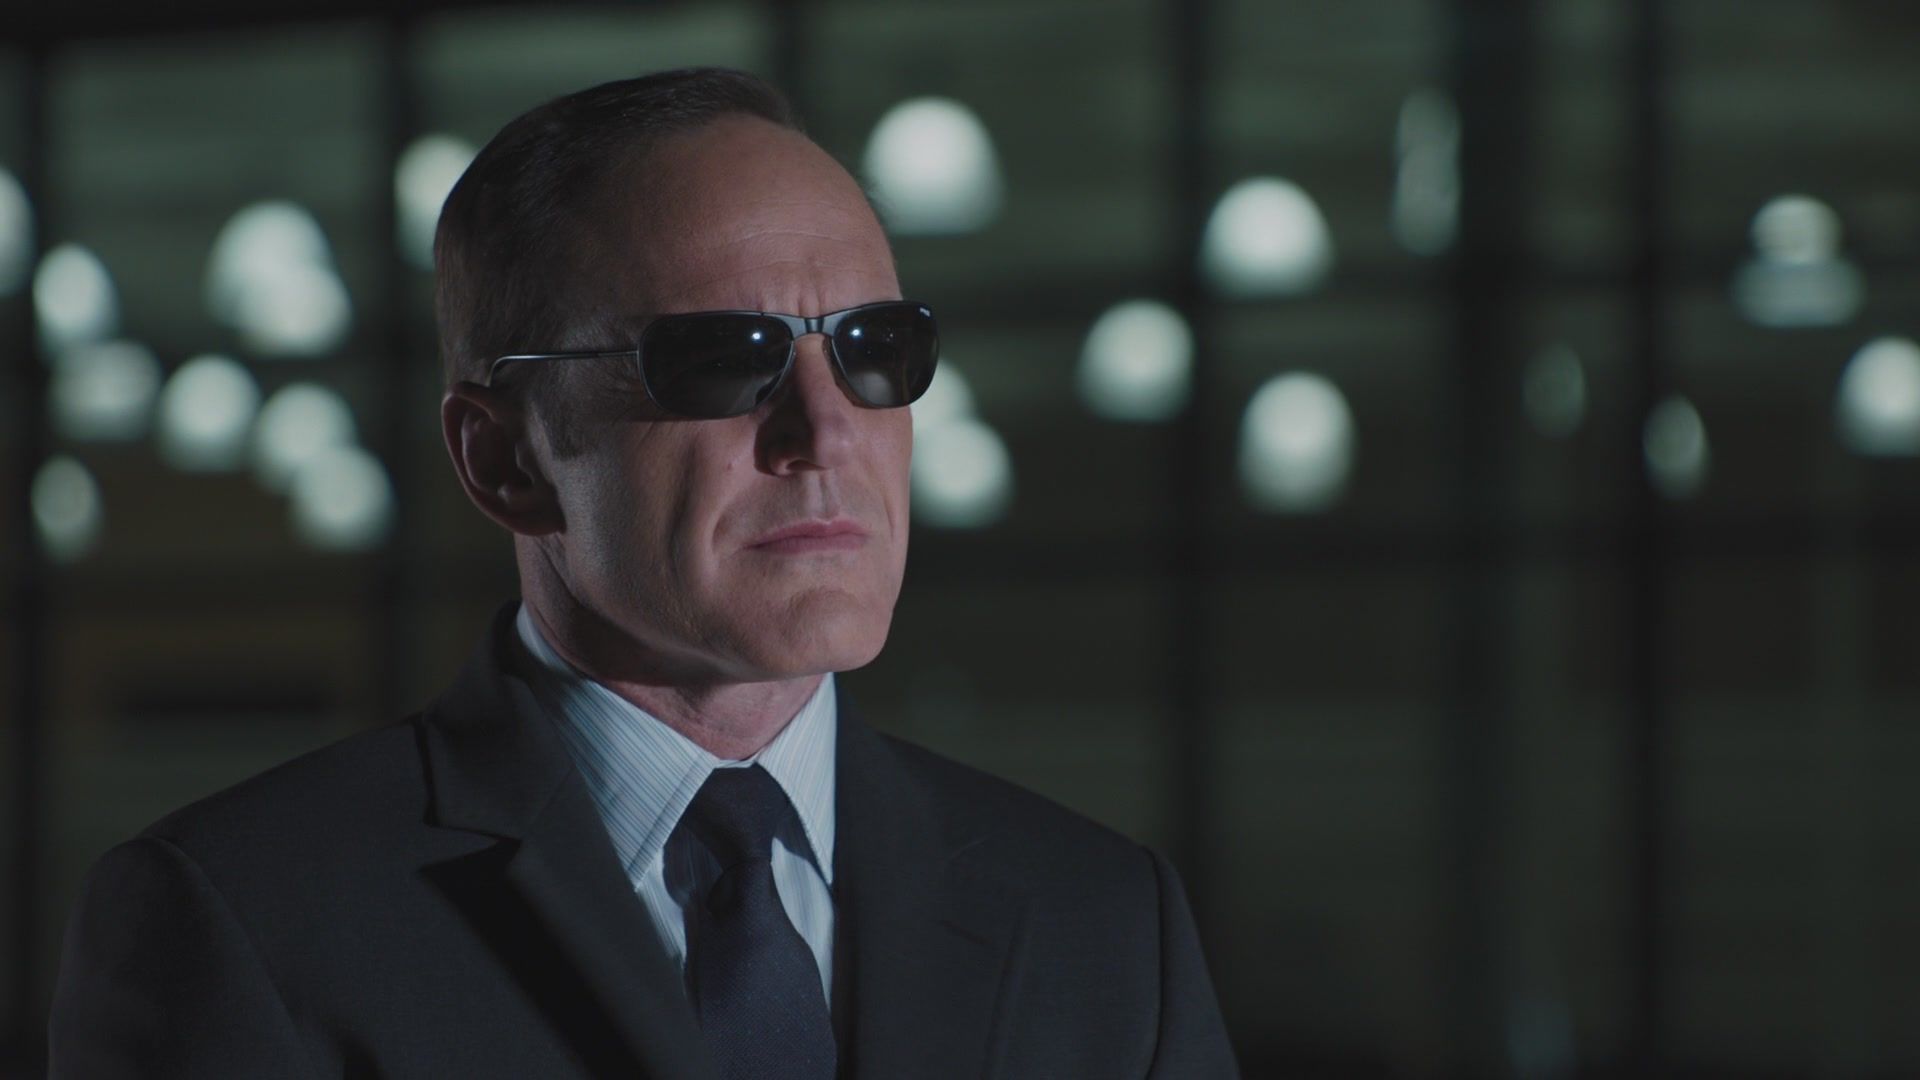 Will The Avengers Ever Know That Coulson Lived?